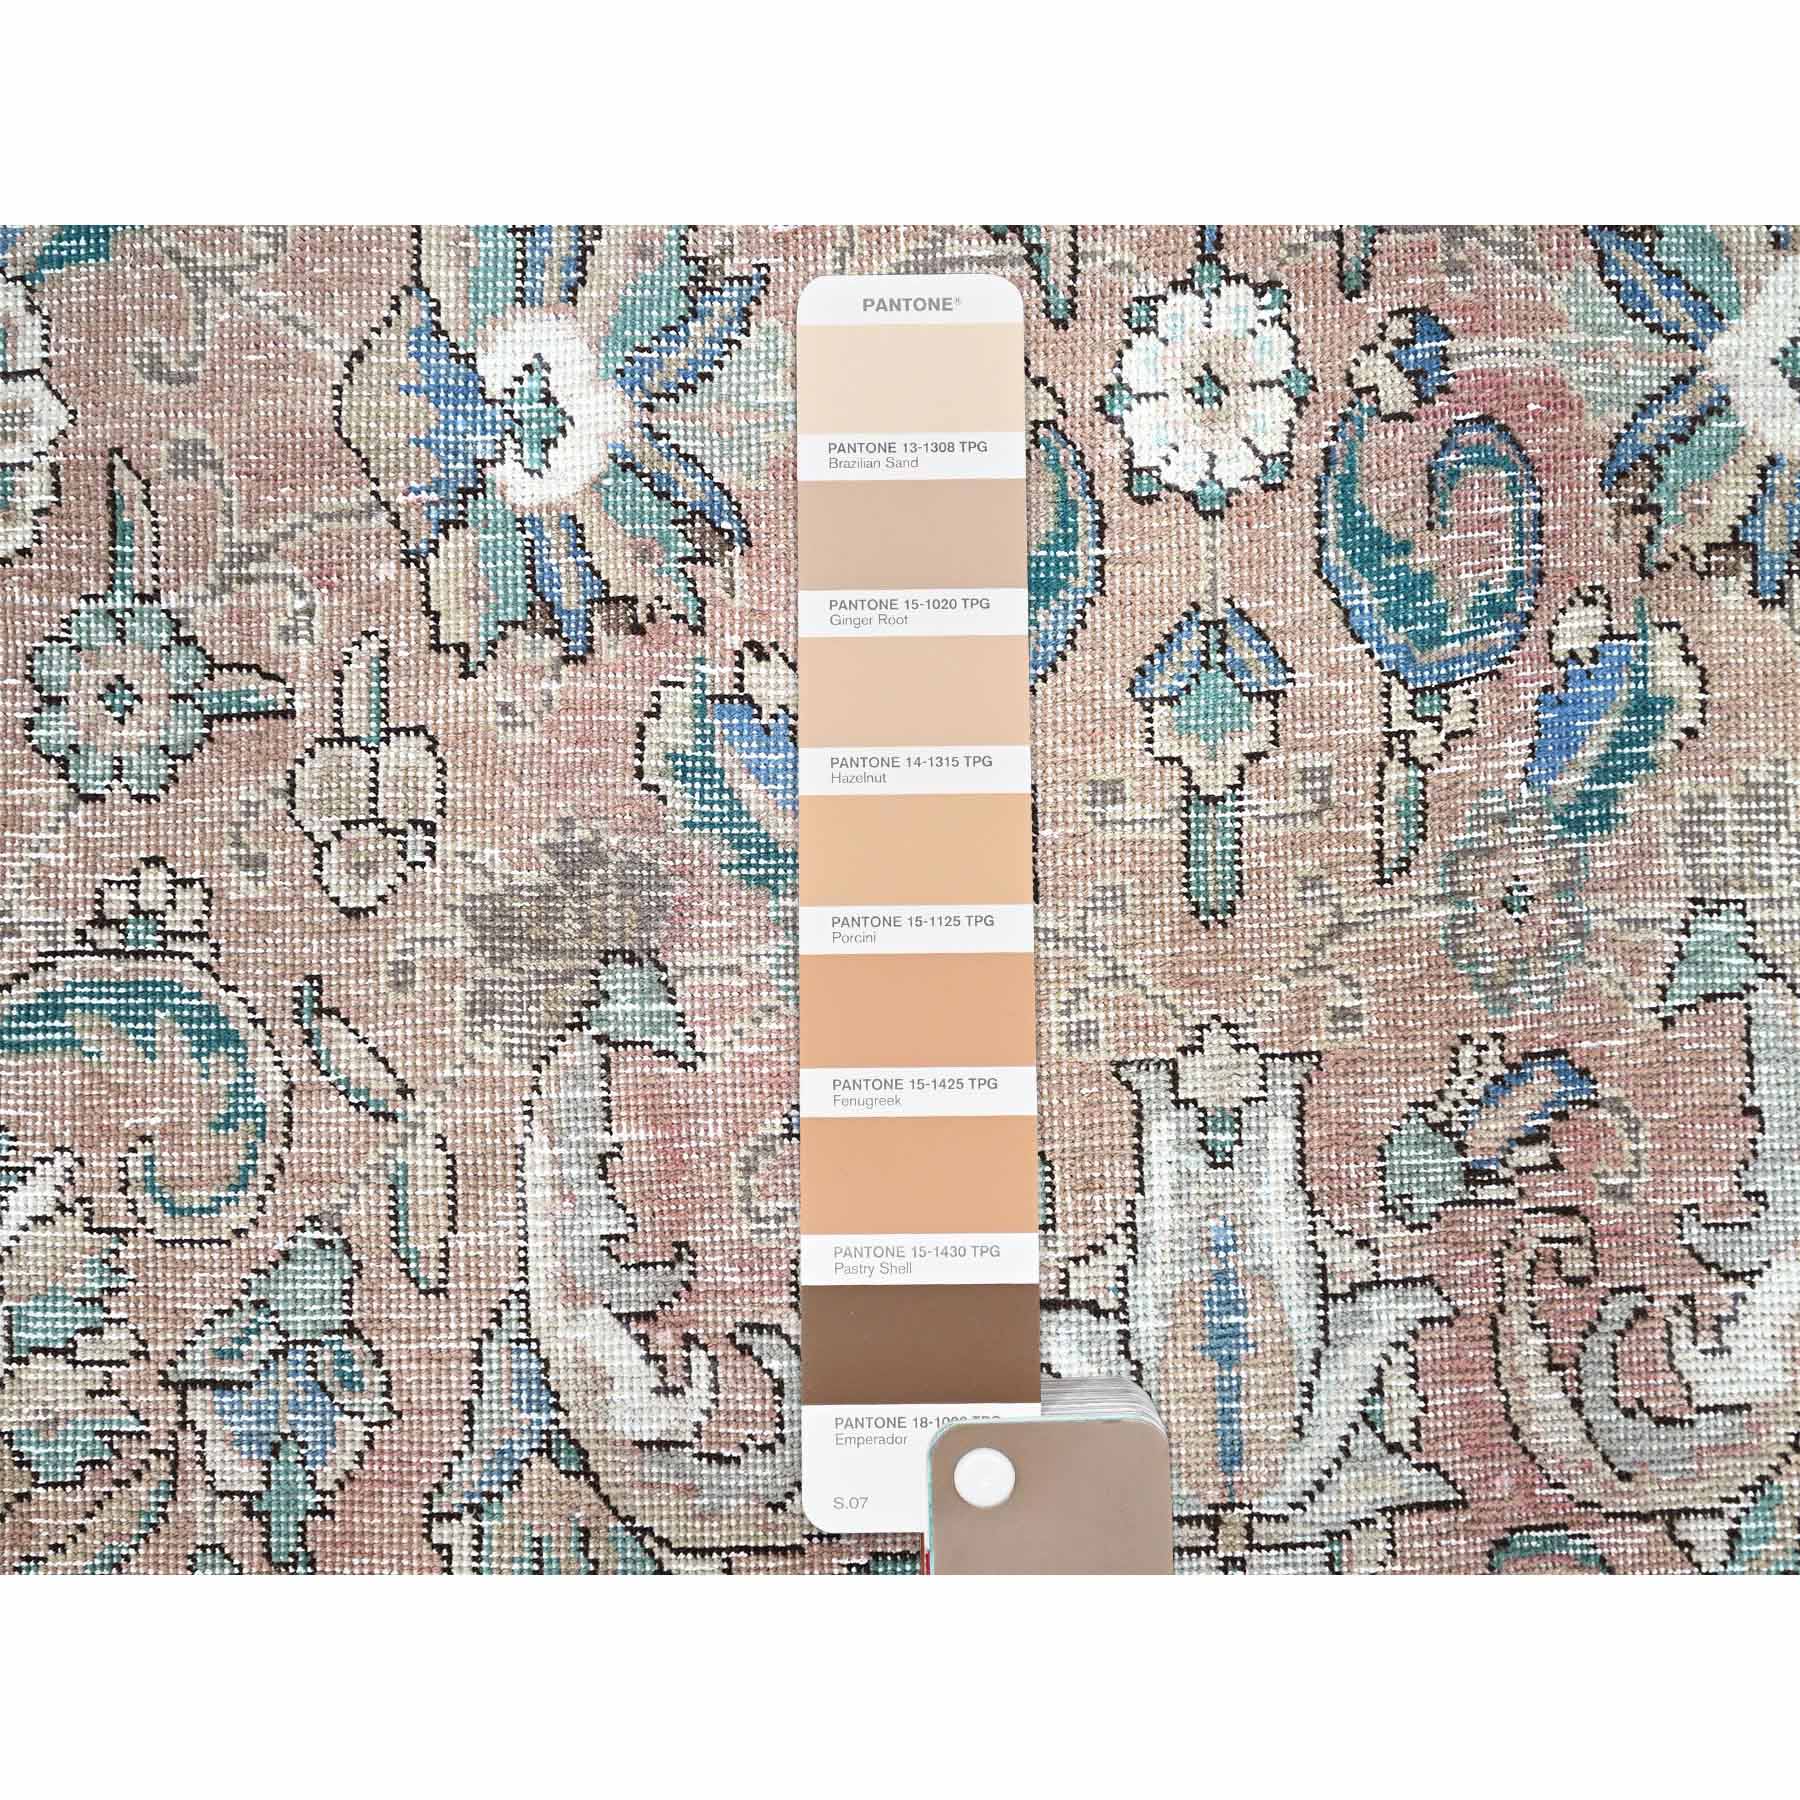 Overdyed-Vintage-Hand-Knotted-Rug-430980